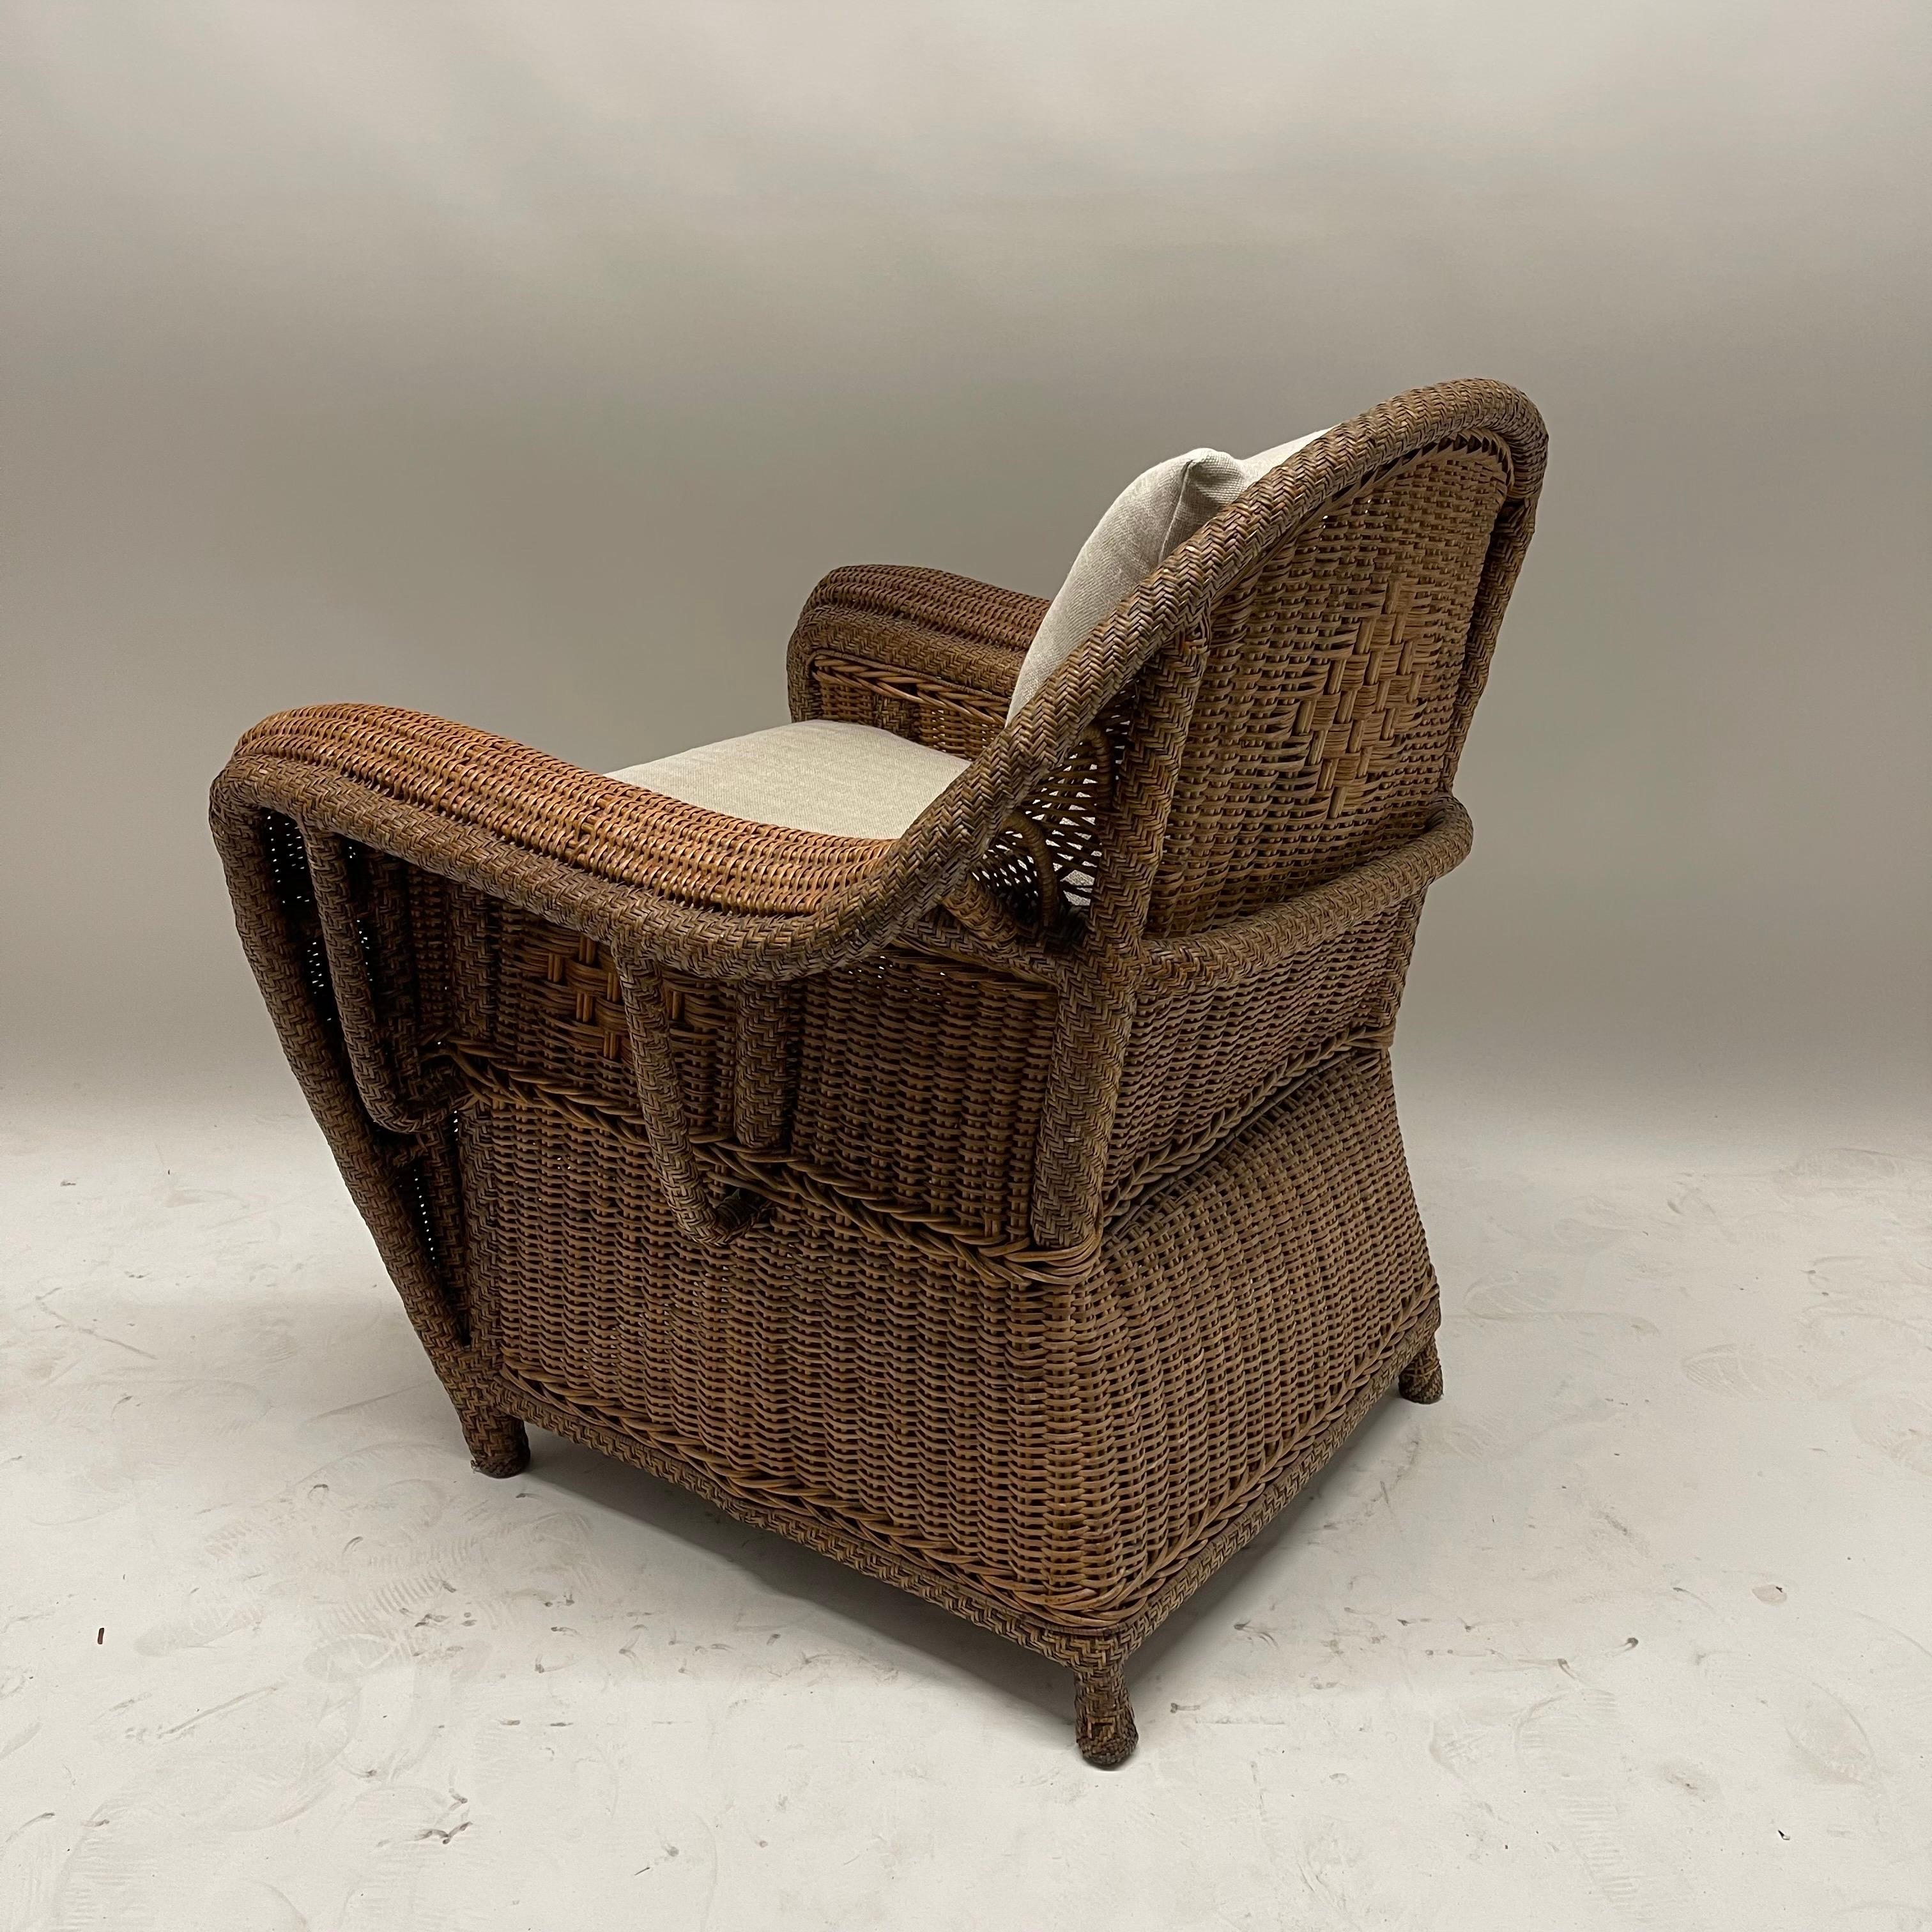 20th Century Rare Pair of Art Deco Wicker and Rattan Club Chairs or Armchairs, circa 1930s